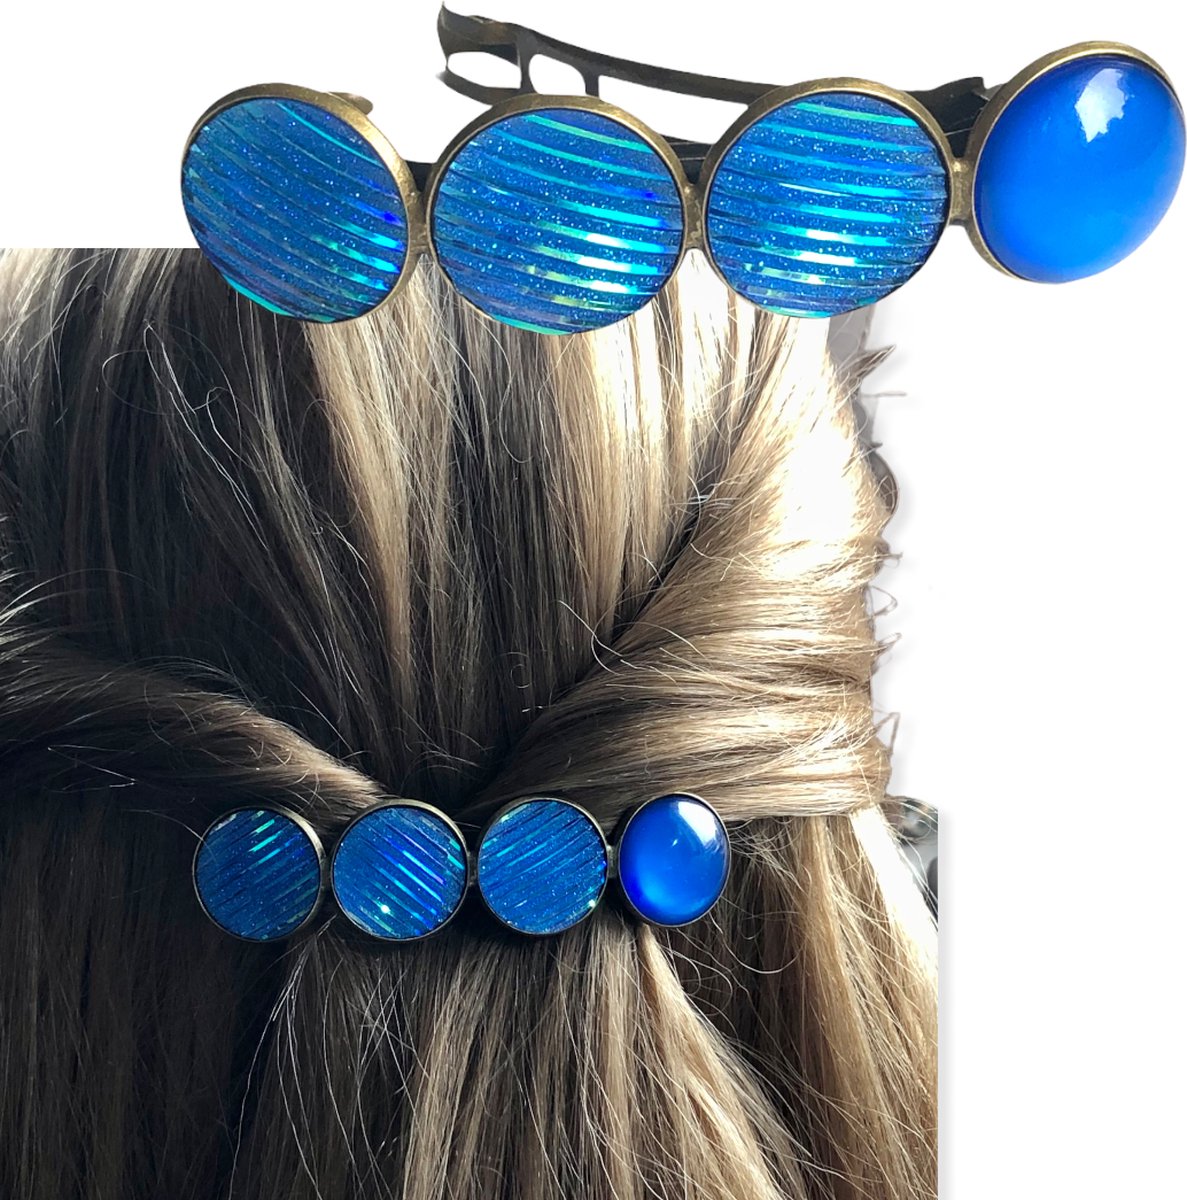 Hairpin.nu Color Hairclip XL glas cabochon haarspeld blauw 044